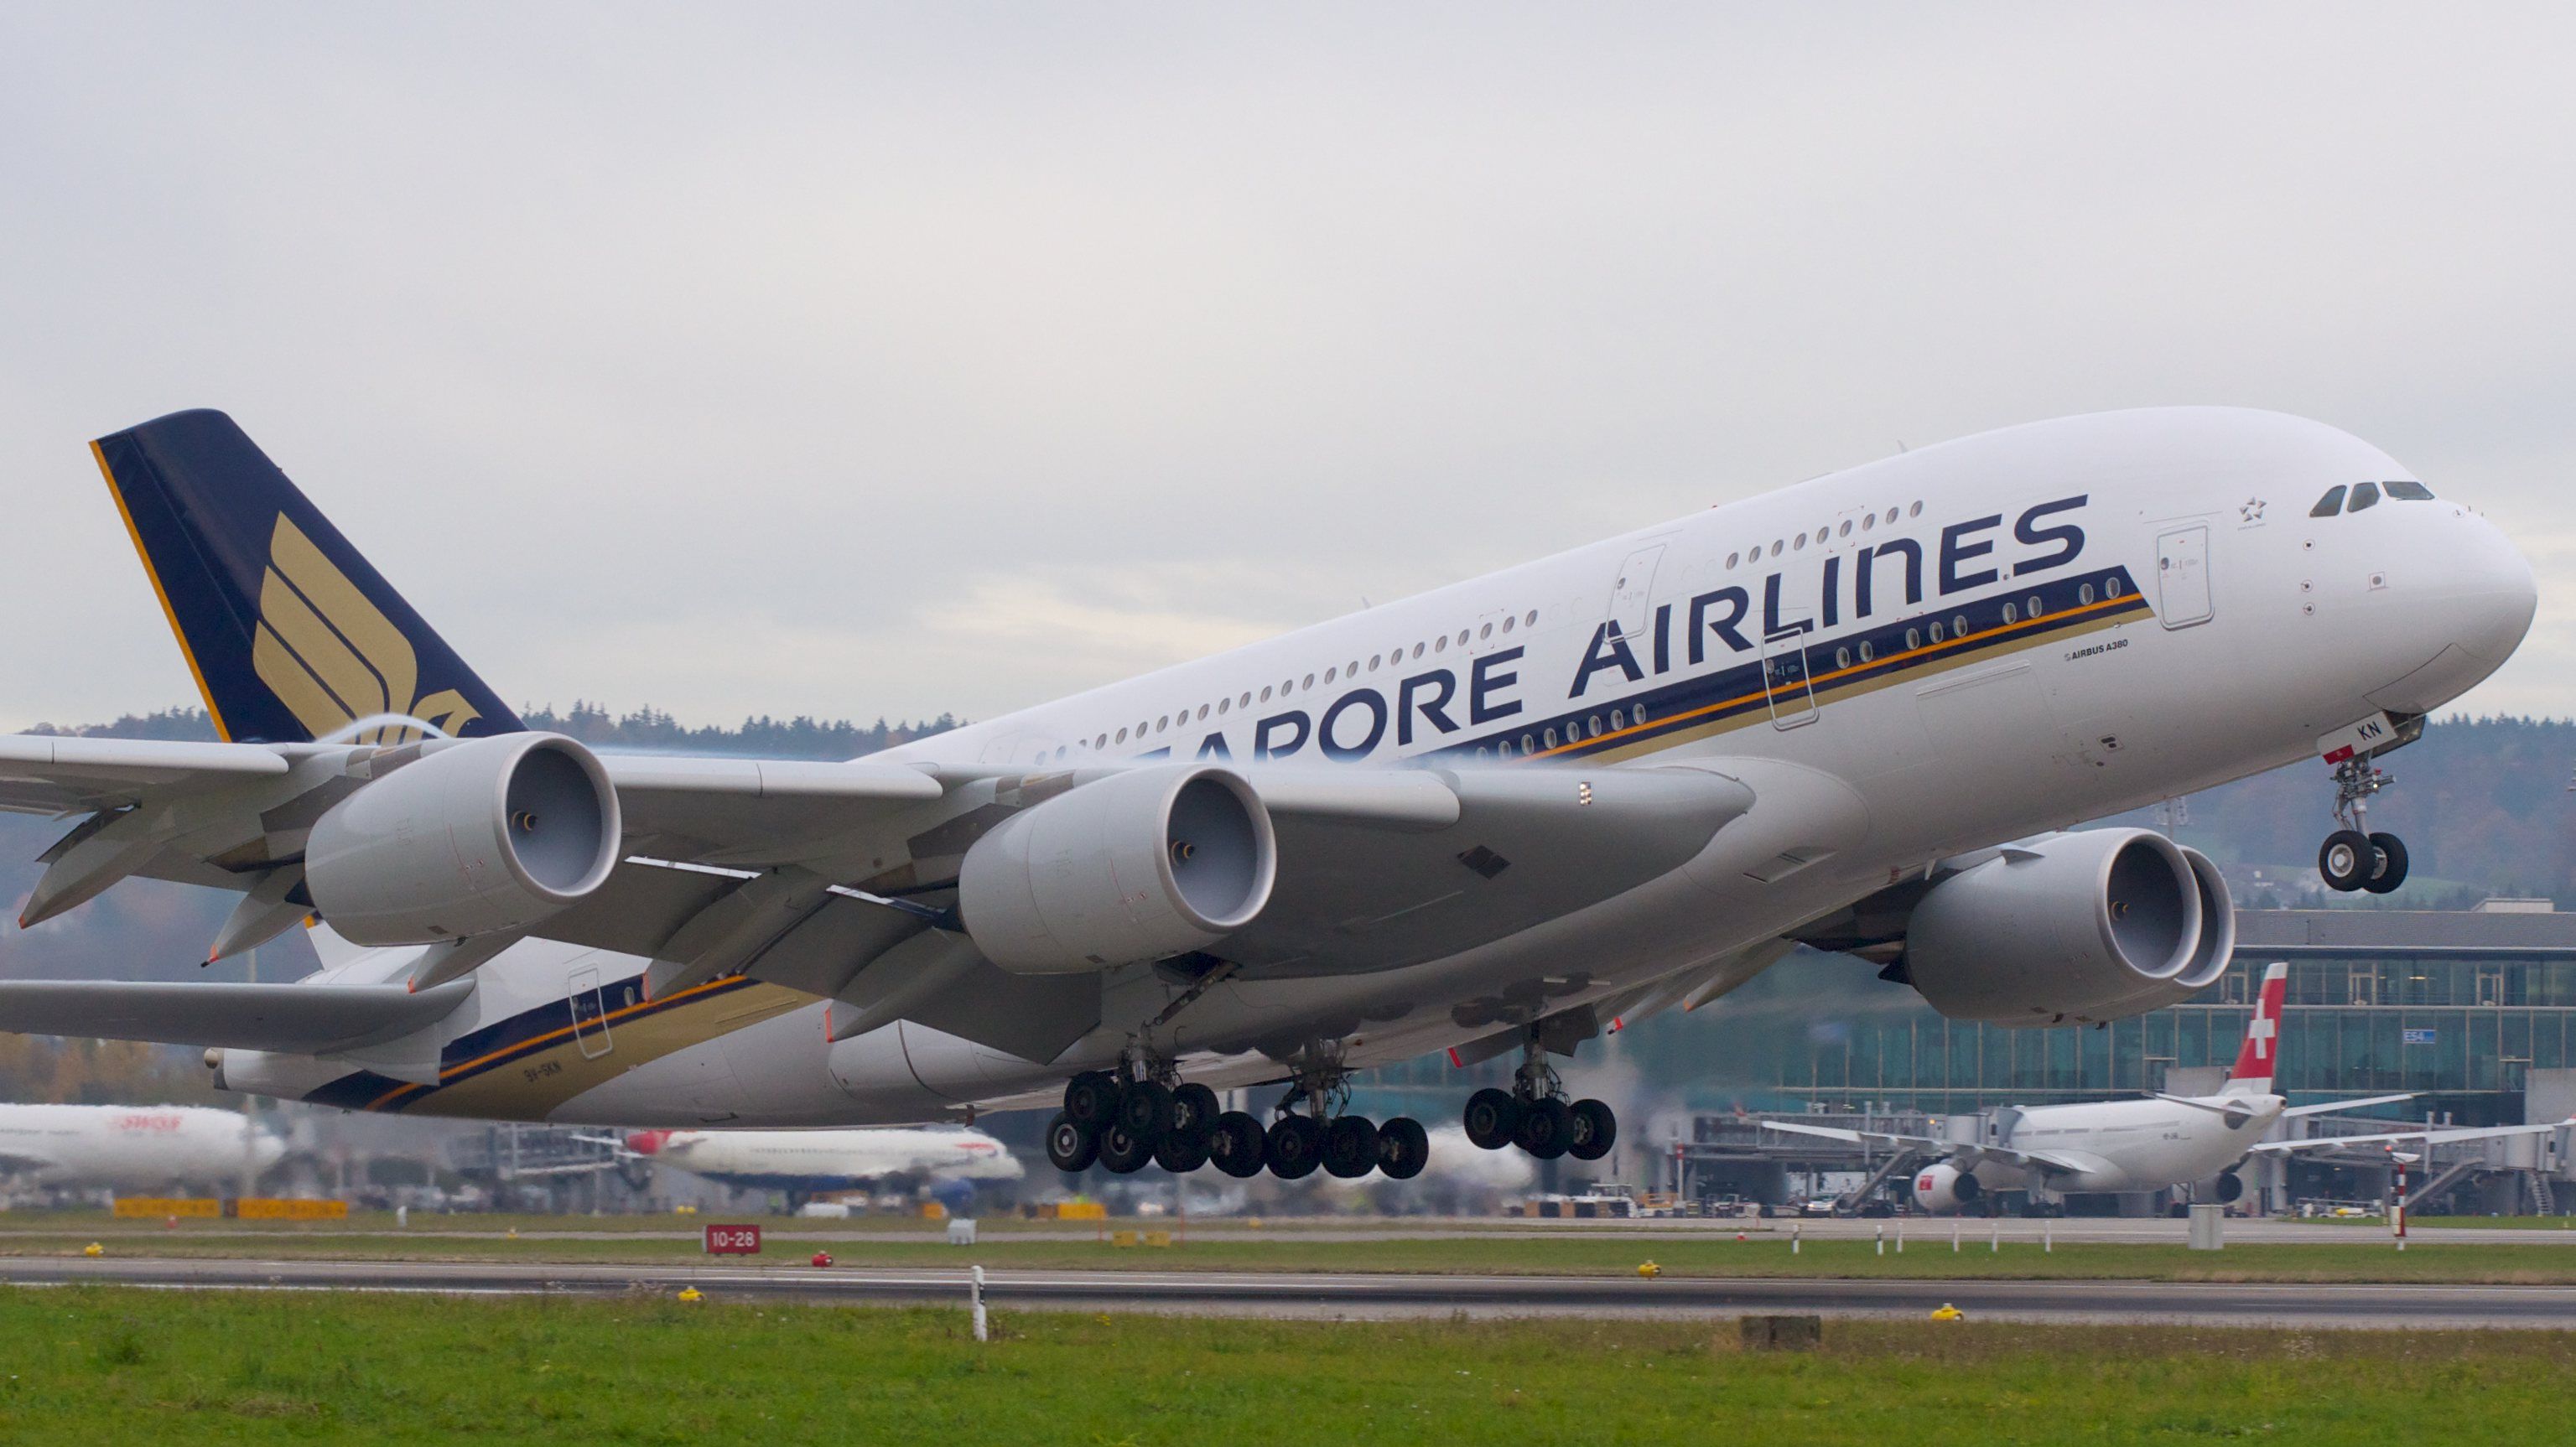 A Singapore Airlines A380 taking off